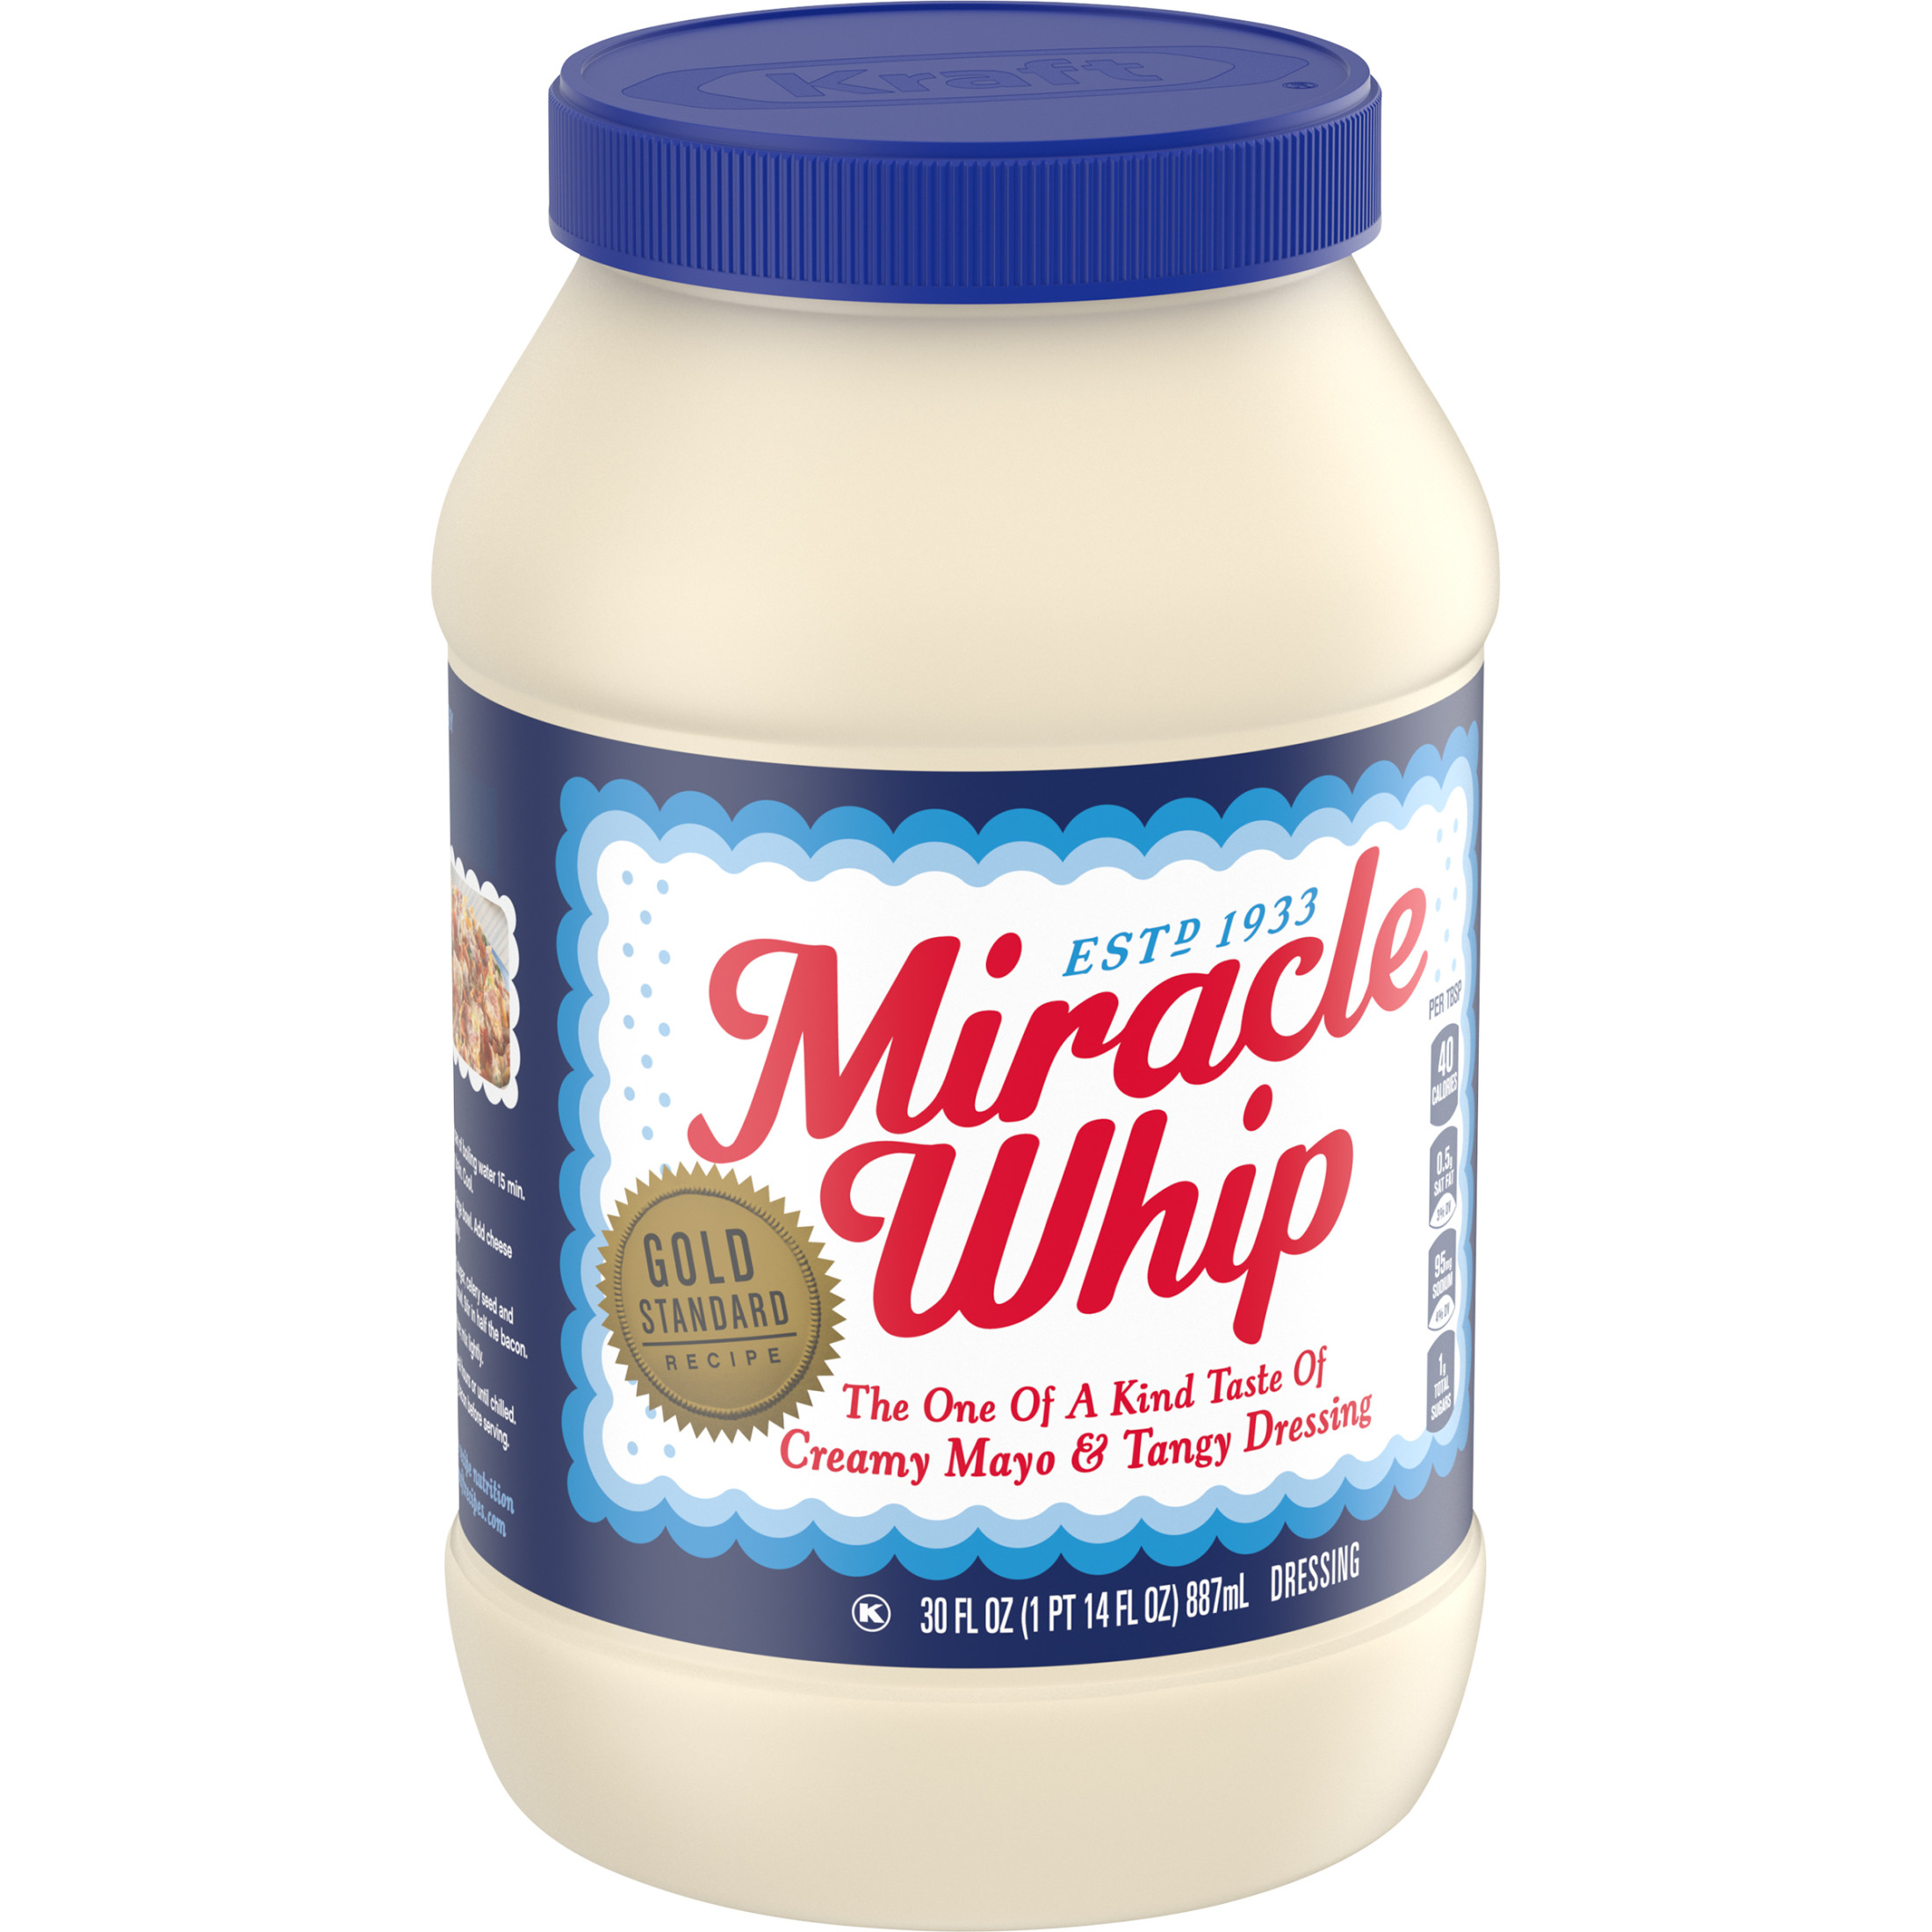 Miracle Whip Mayo-like Dressing, for a Keto and Low Carb Lifestyle, 30 fl oz Jar - image 13 of 16